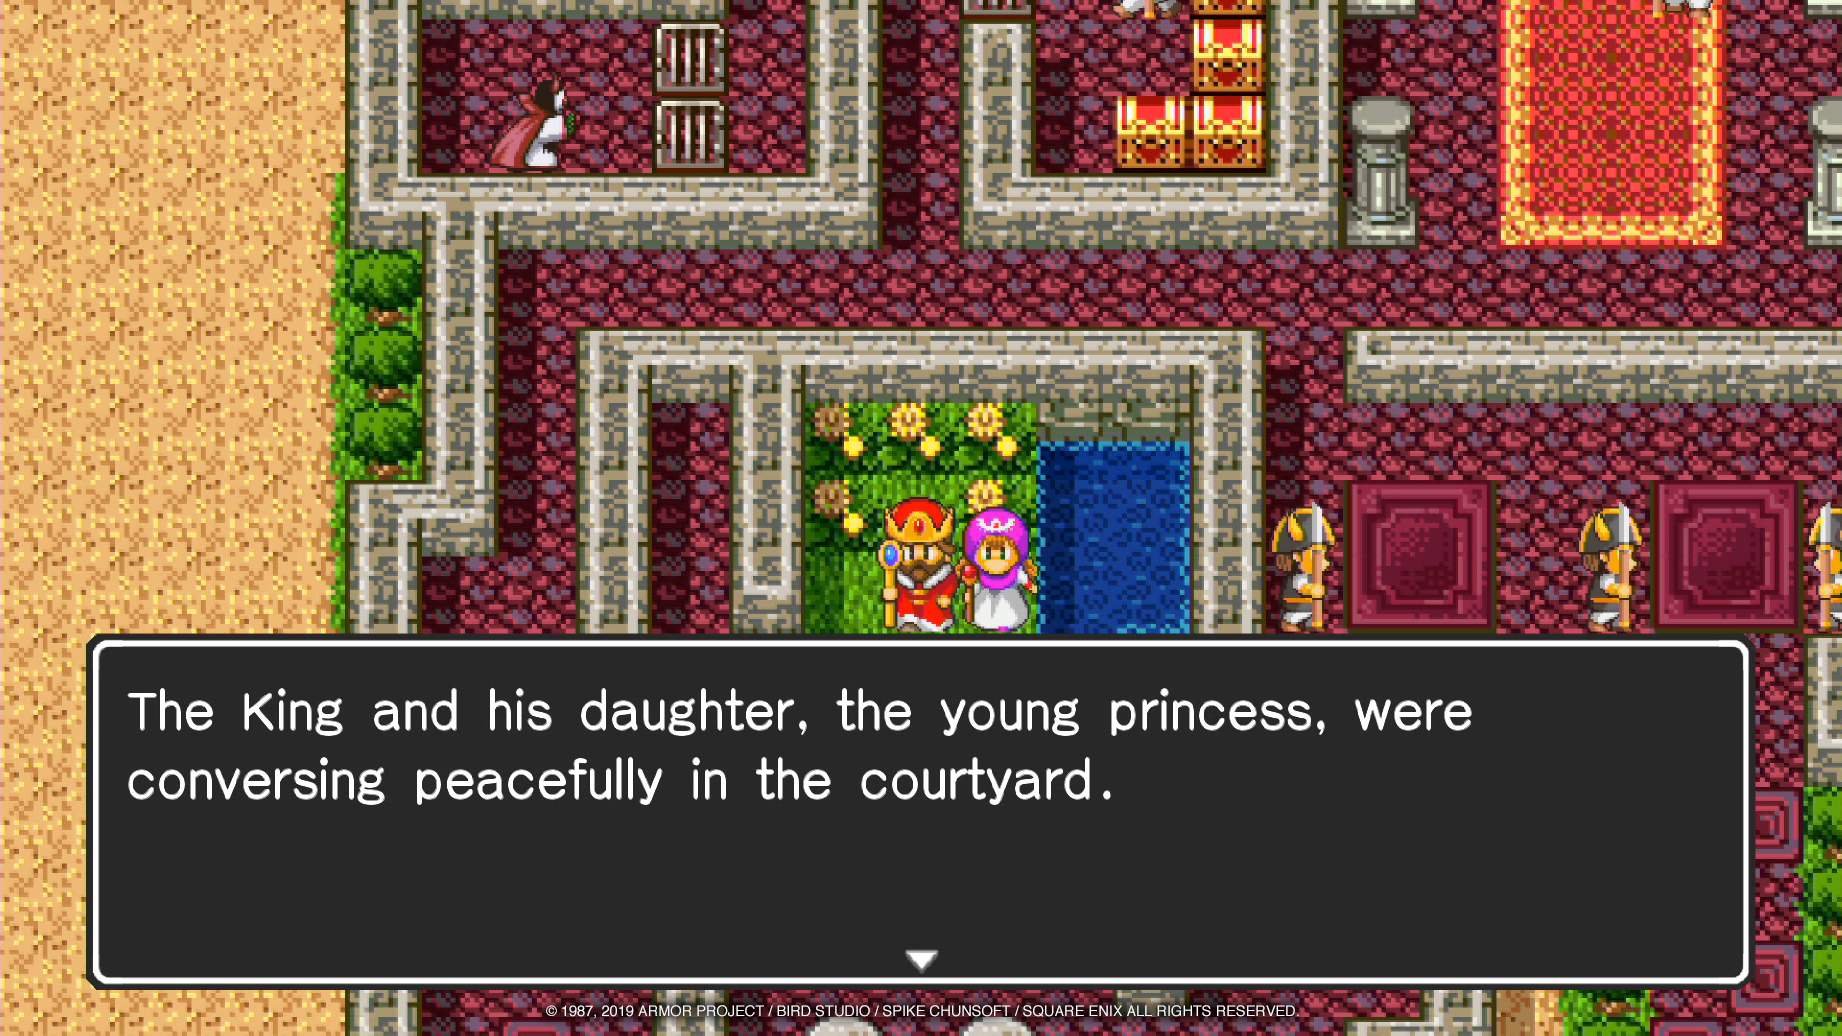 The king of Moonbrooke and his daughter converse in courtyard